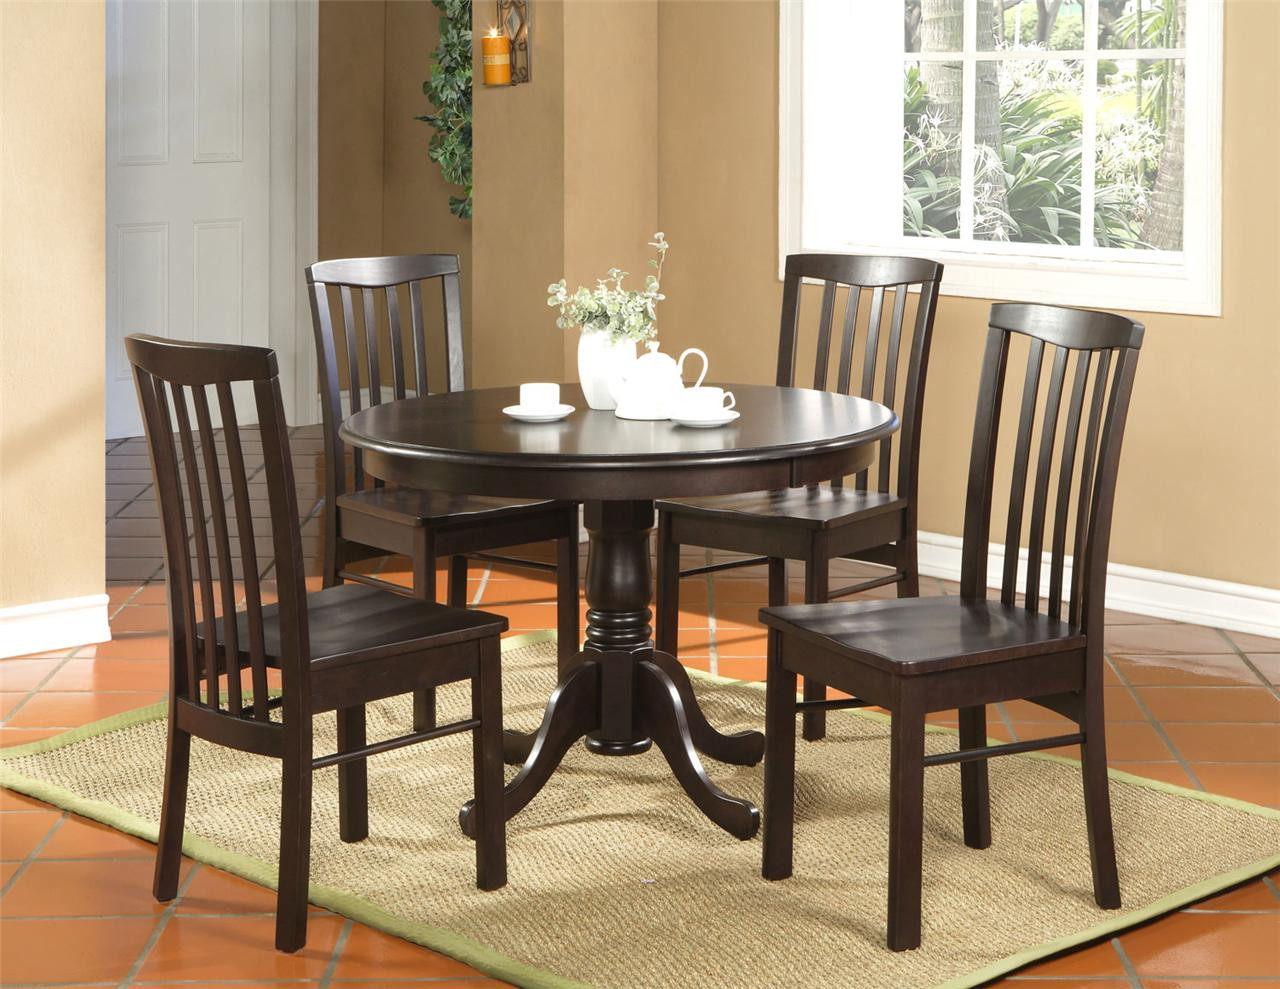 Small Round Kitchen Table Sets
 5PC ROUND KITCHEN DINETTE SET TABLE AND 4 CHAIRS WALNUT